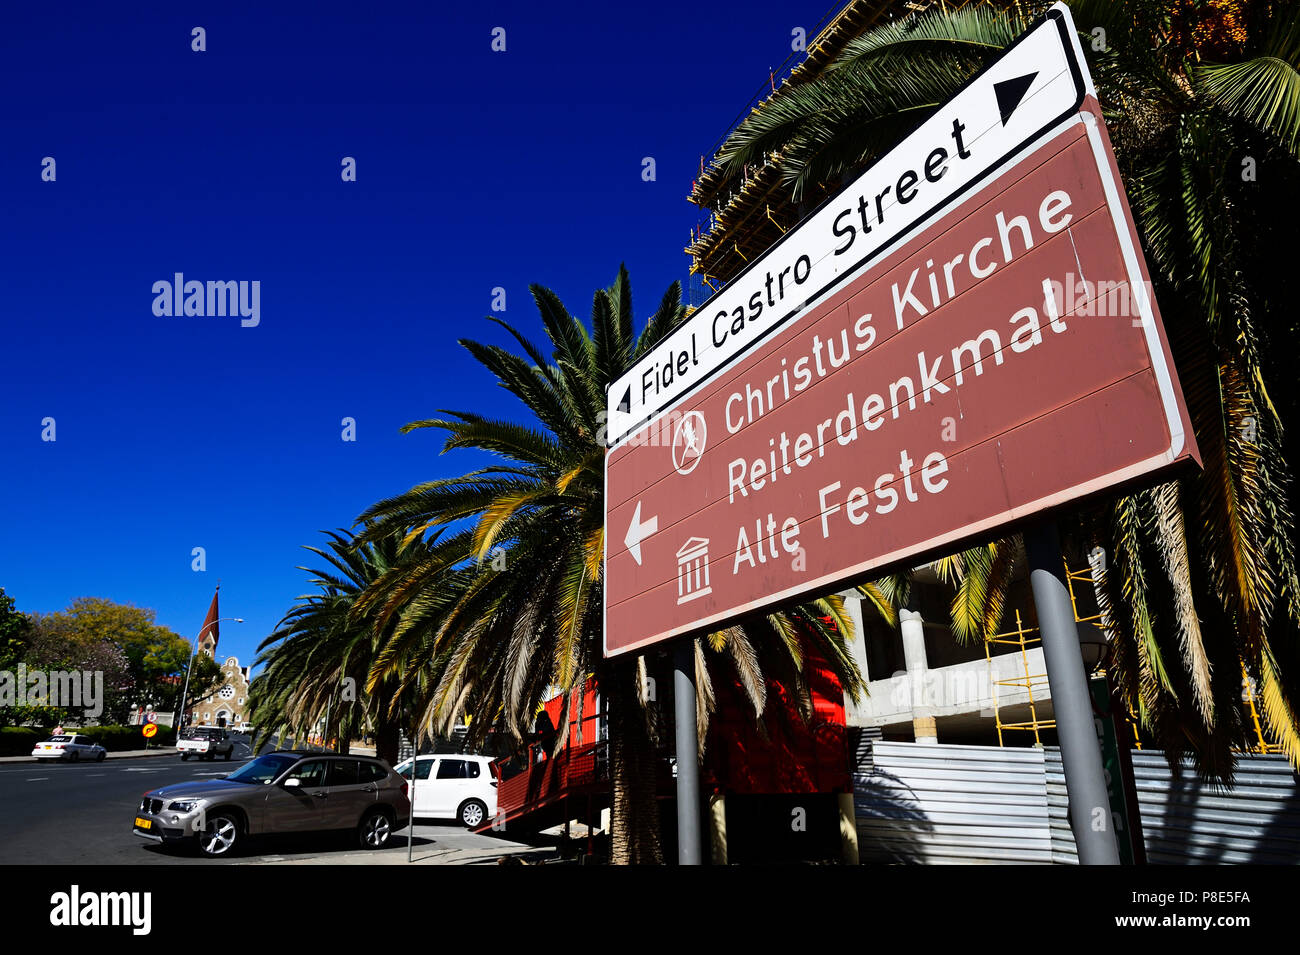 Sign Christ Church and Fidel Castro street with a view of the church, Windhoek, Namibia Stock Photo